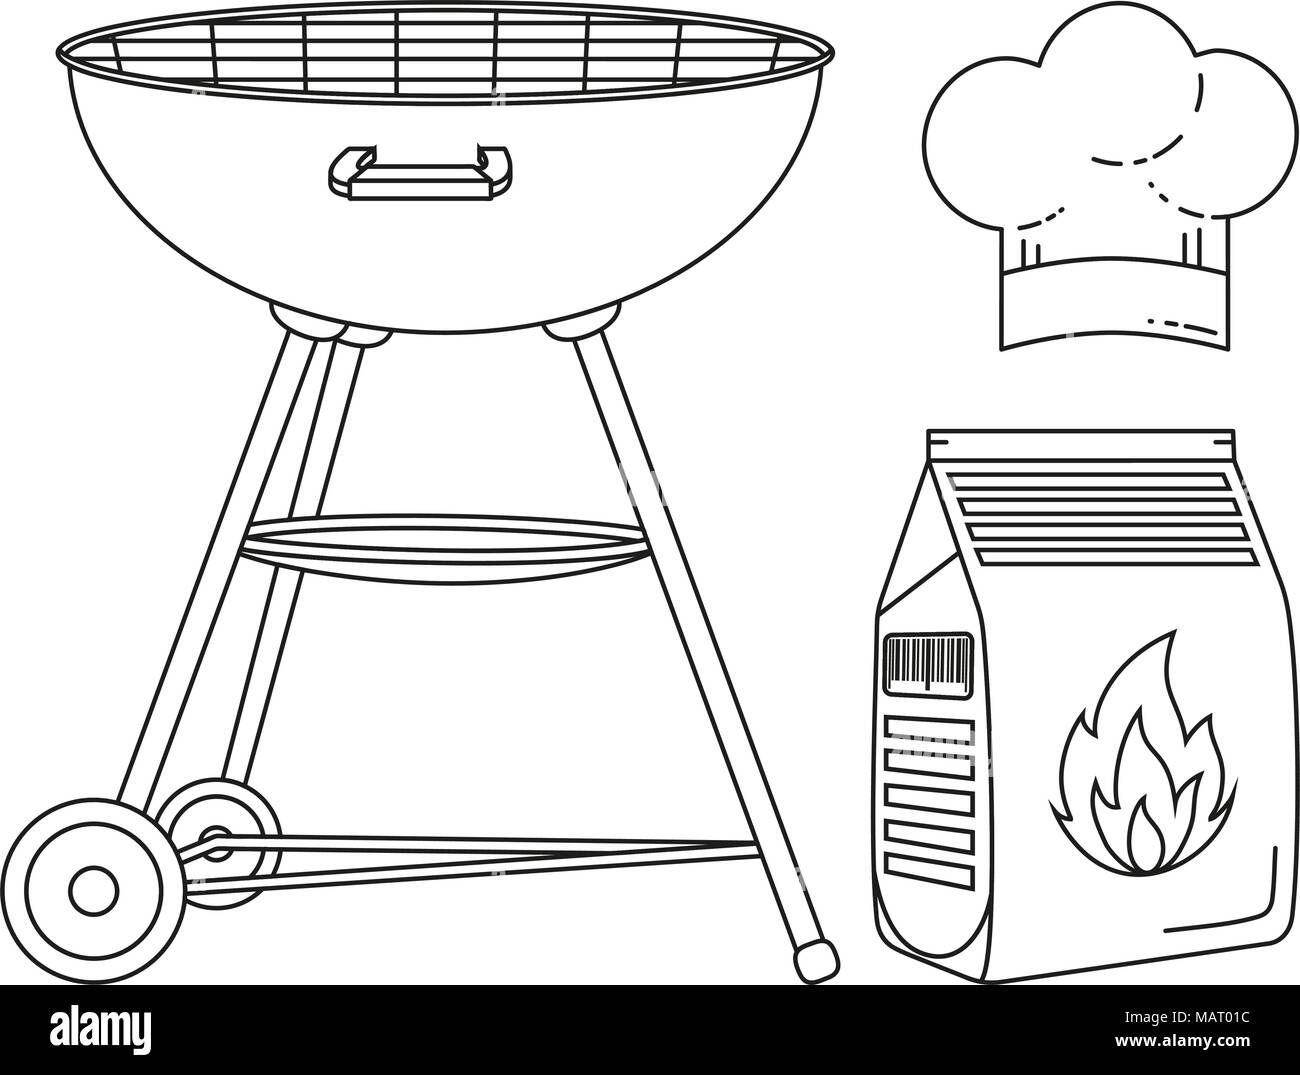 Line art black and white outdoors cooking set bbq grill coal bag chef hat holiday recreation vector illustration for banner sticker badge sign s stock vector image art